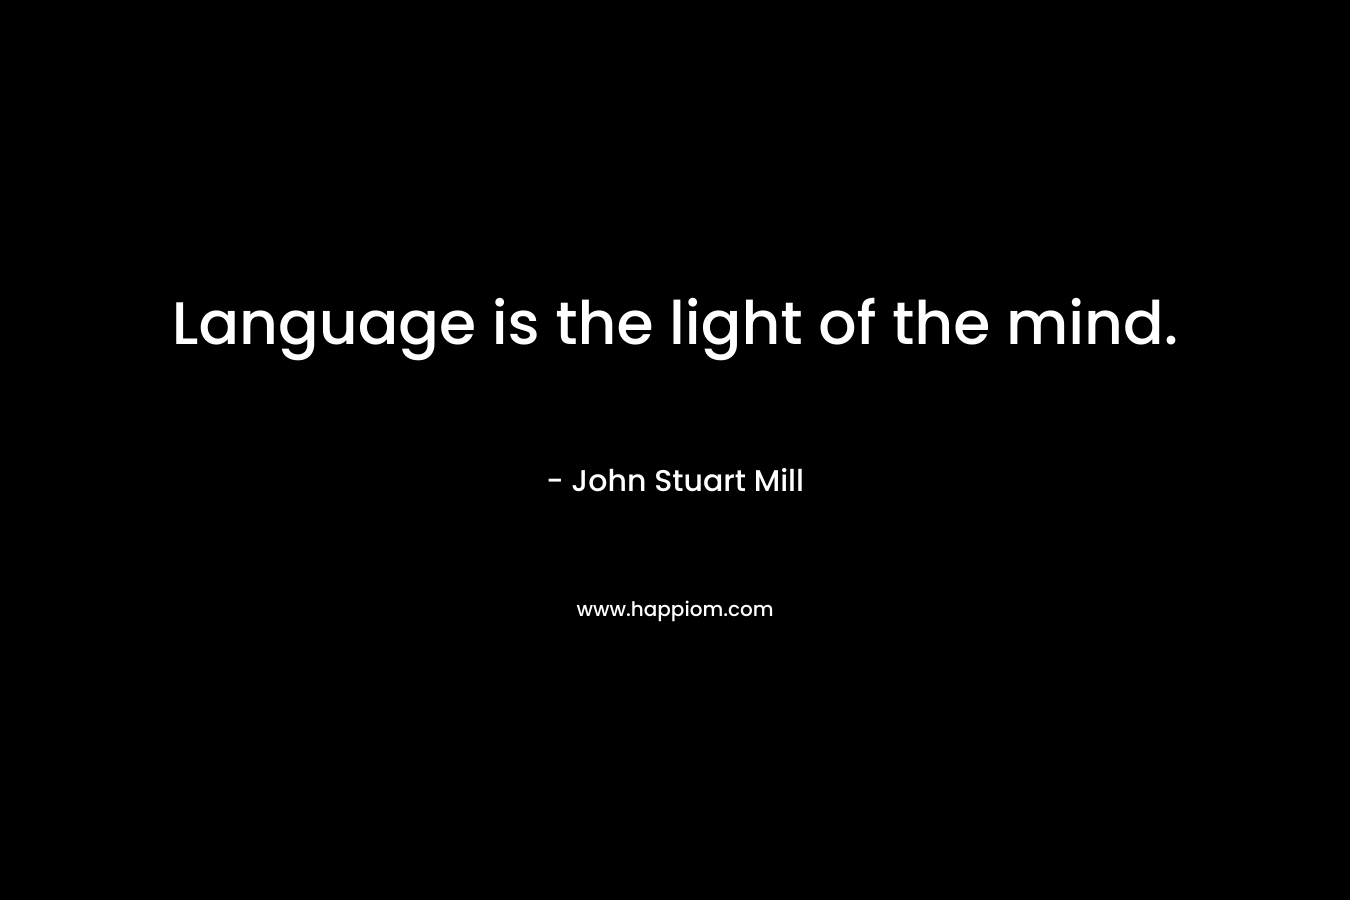 Language is the light of the mind.